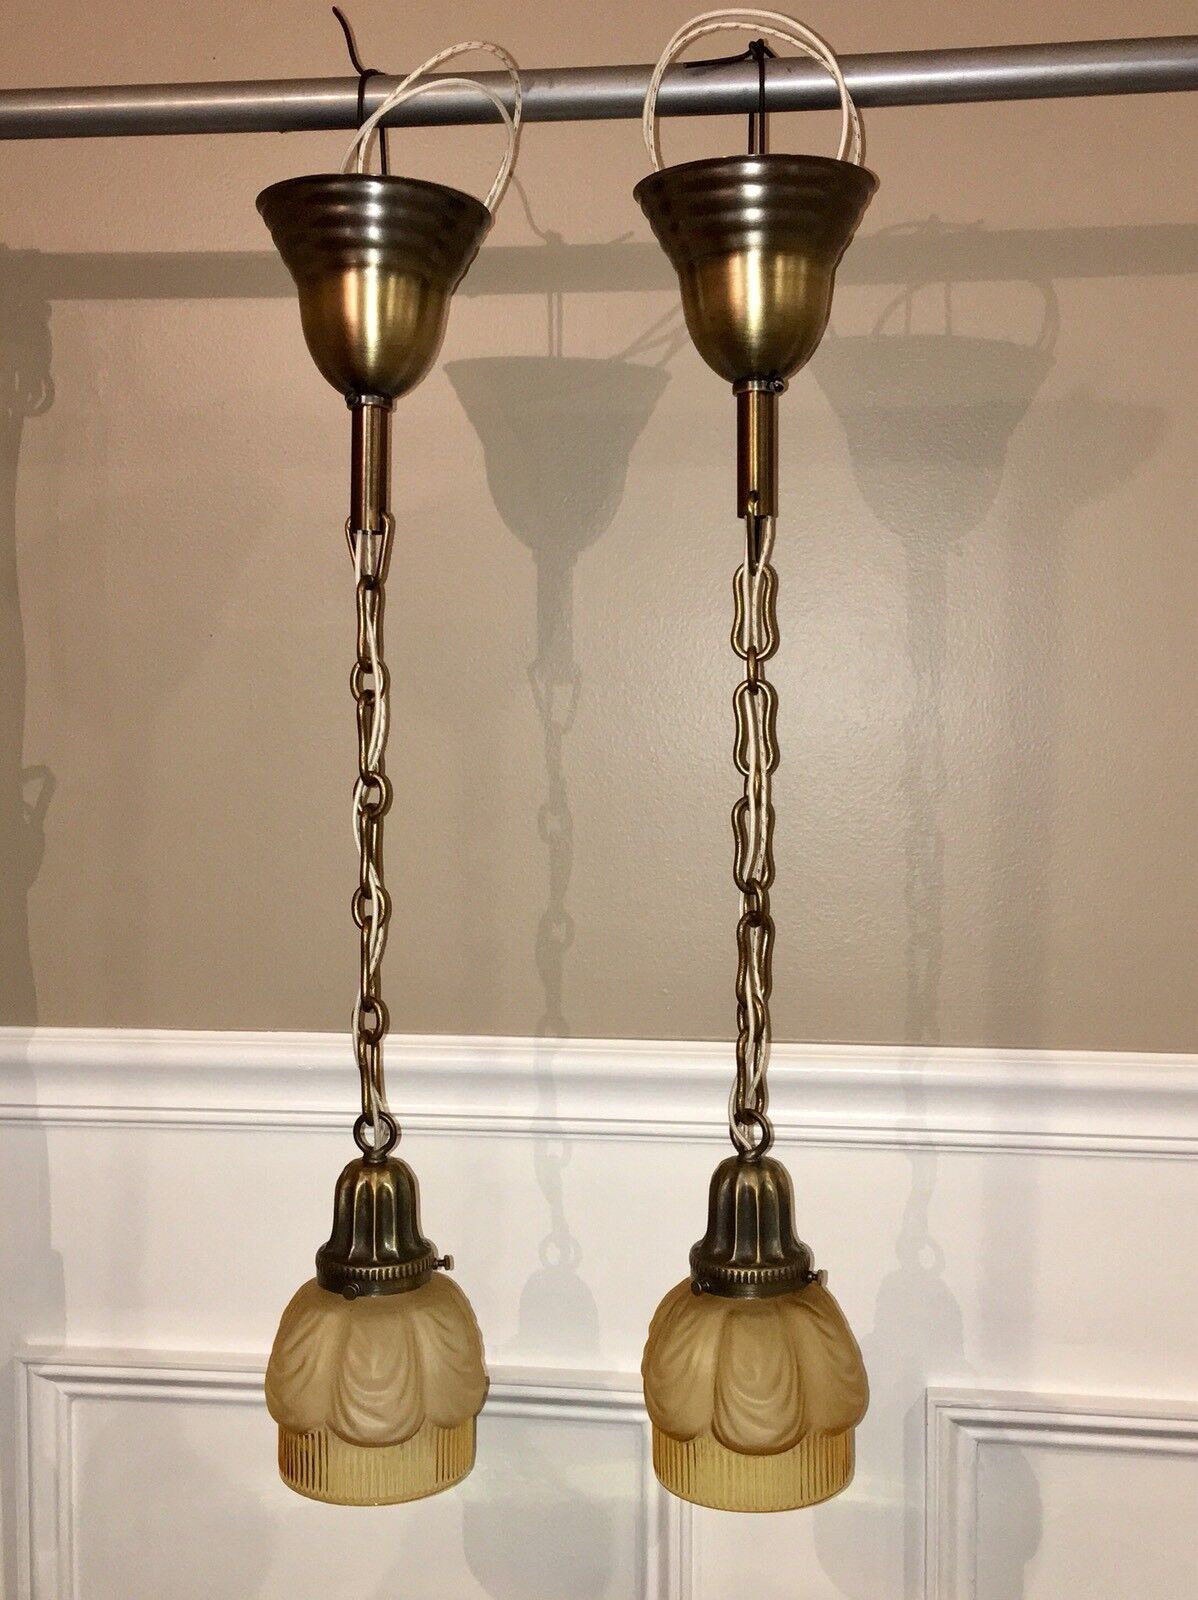 26” Wired Pair Brass Light Fixtures Scalloped Fitters  Shades 49C